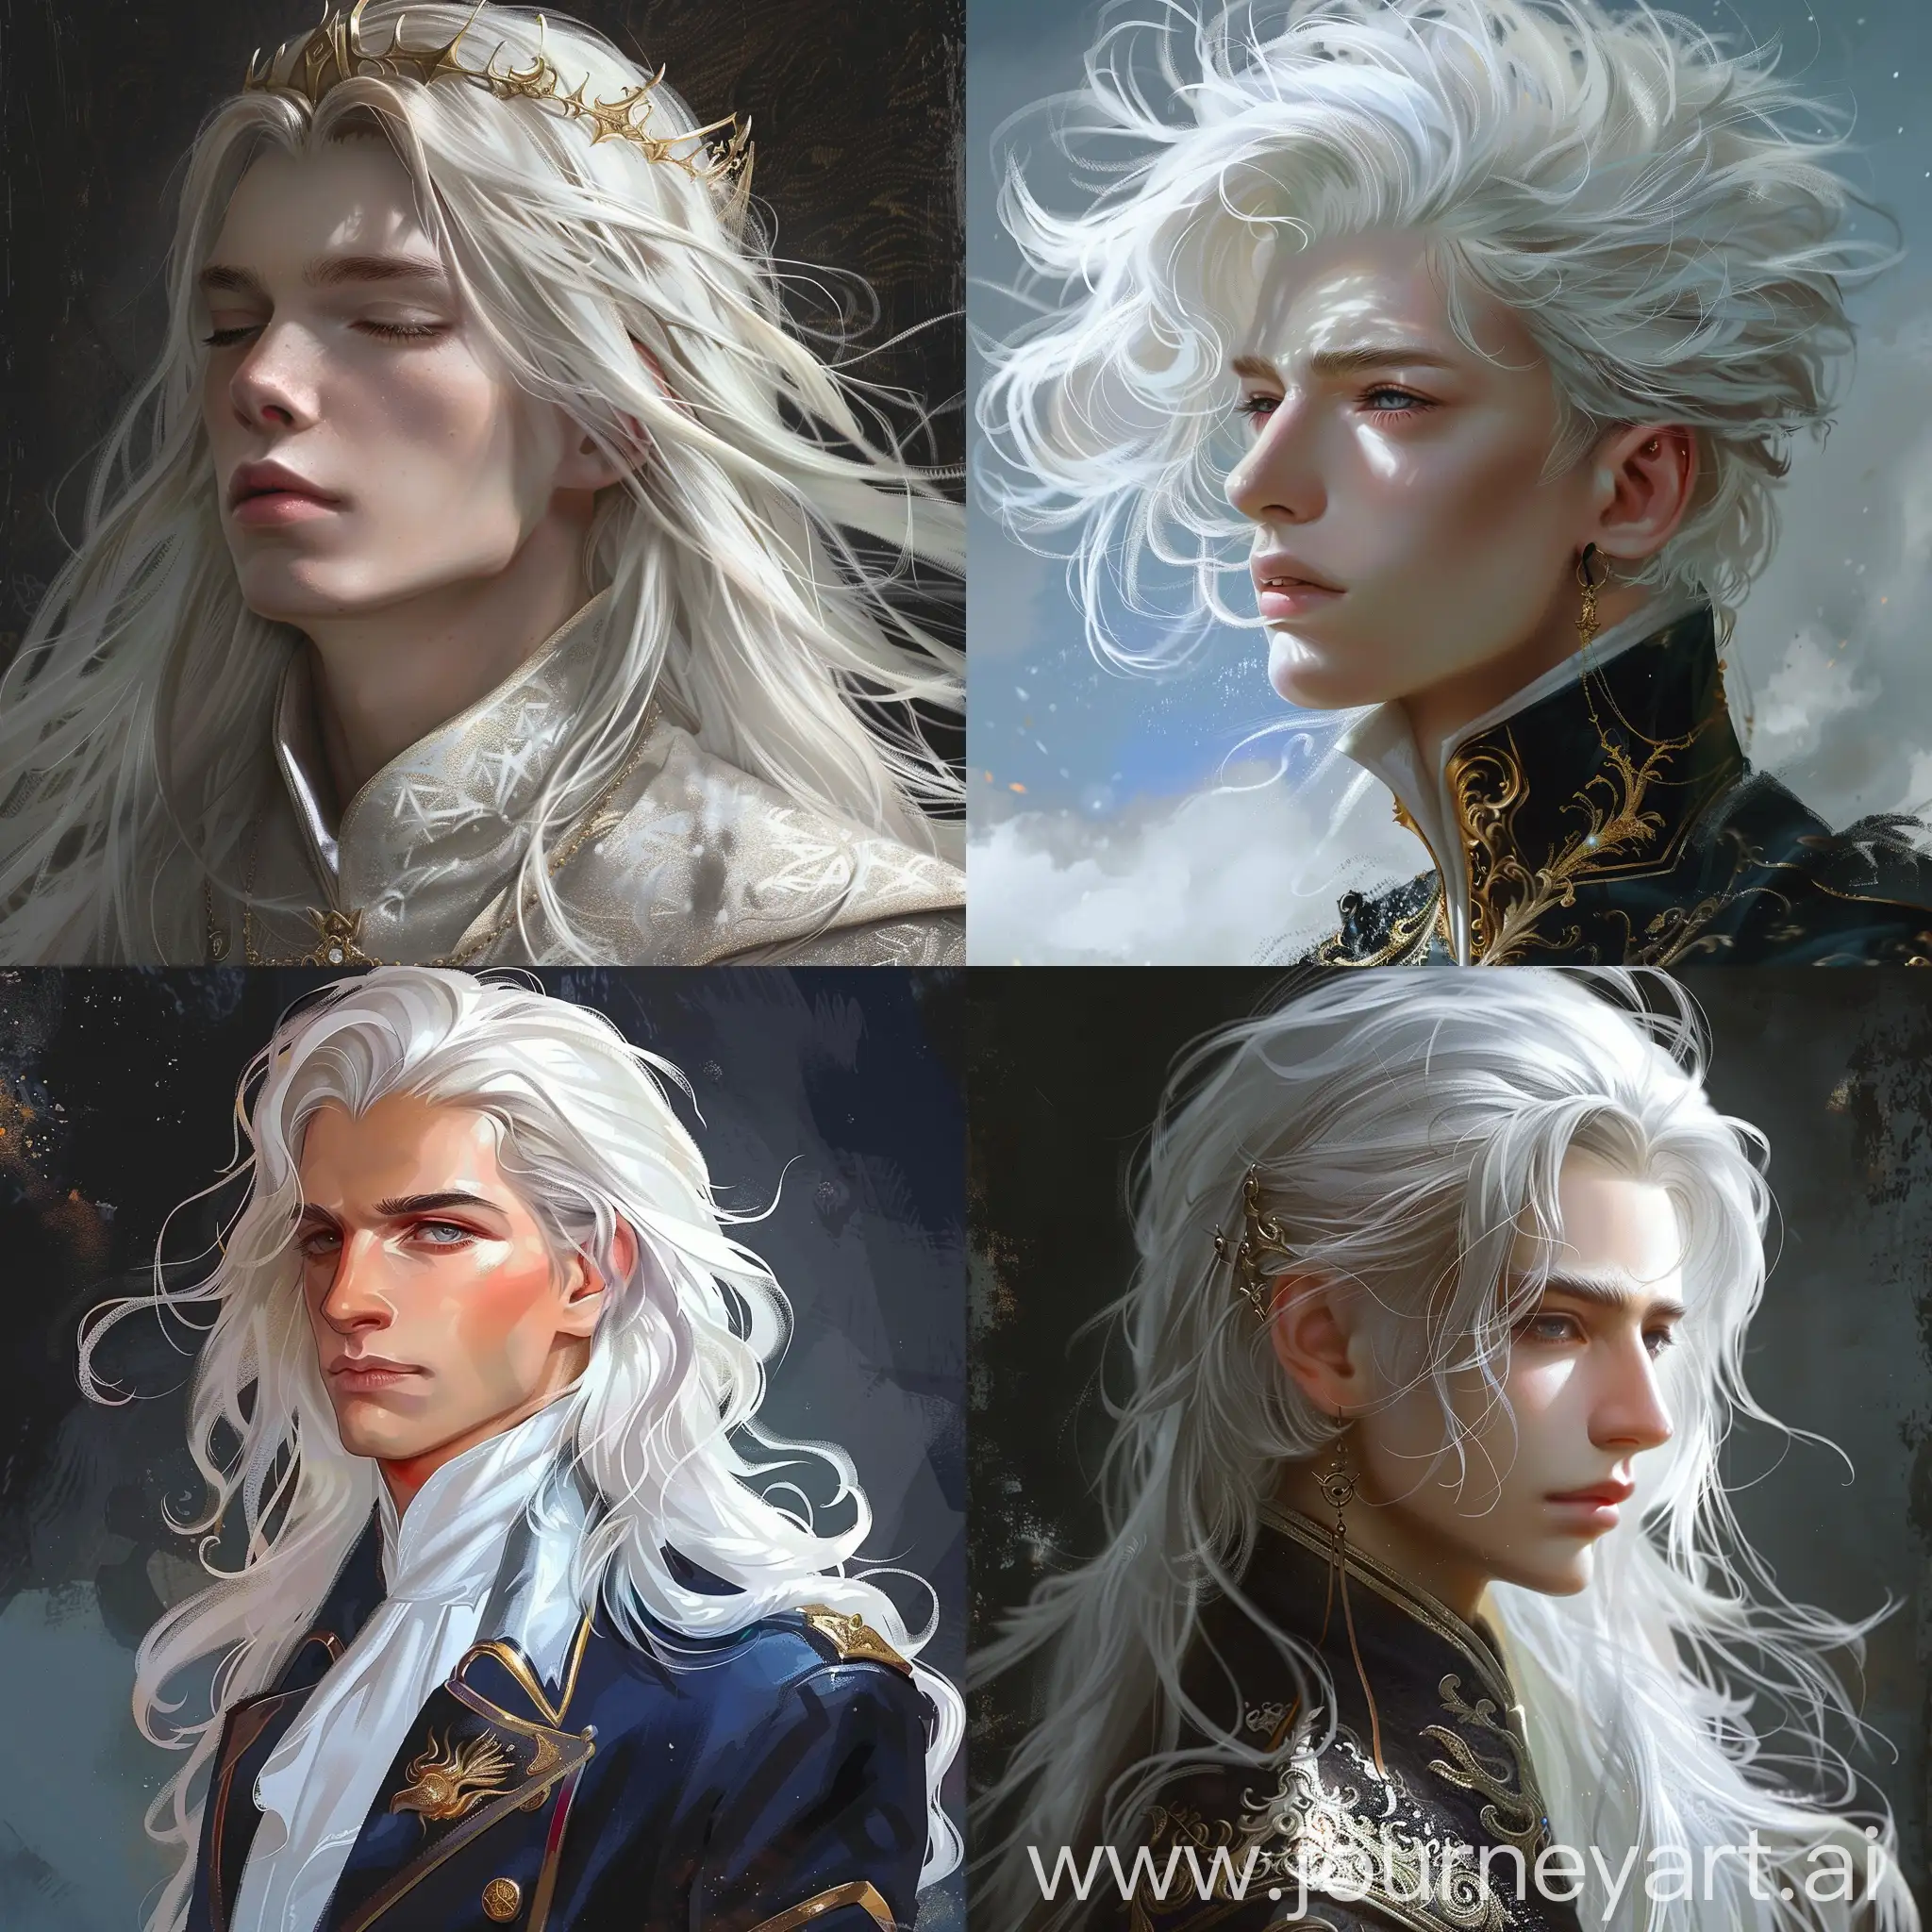 Majestic-WhiteHaired-Prince-in-Regal-Attire